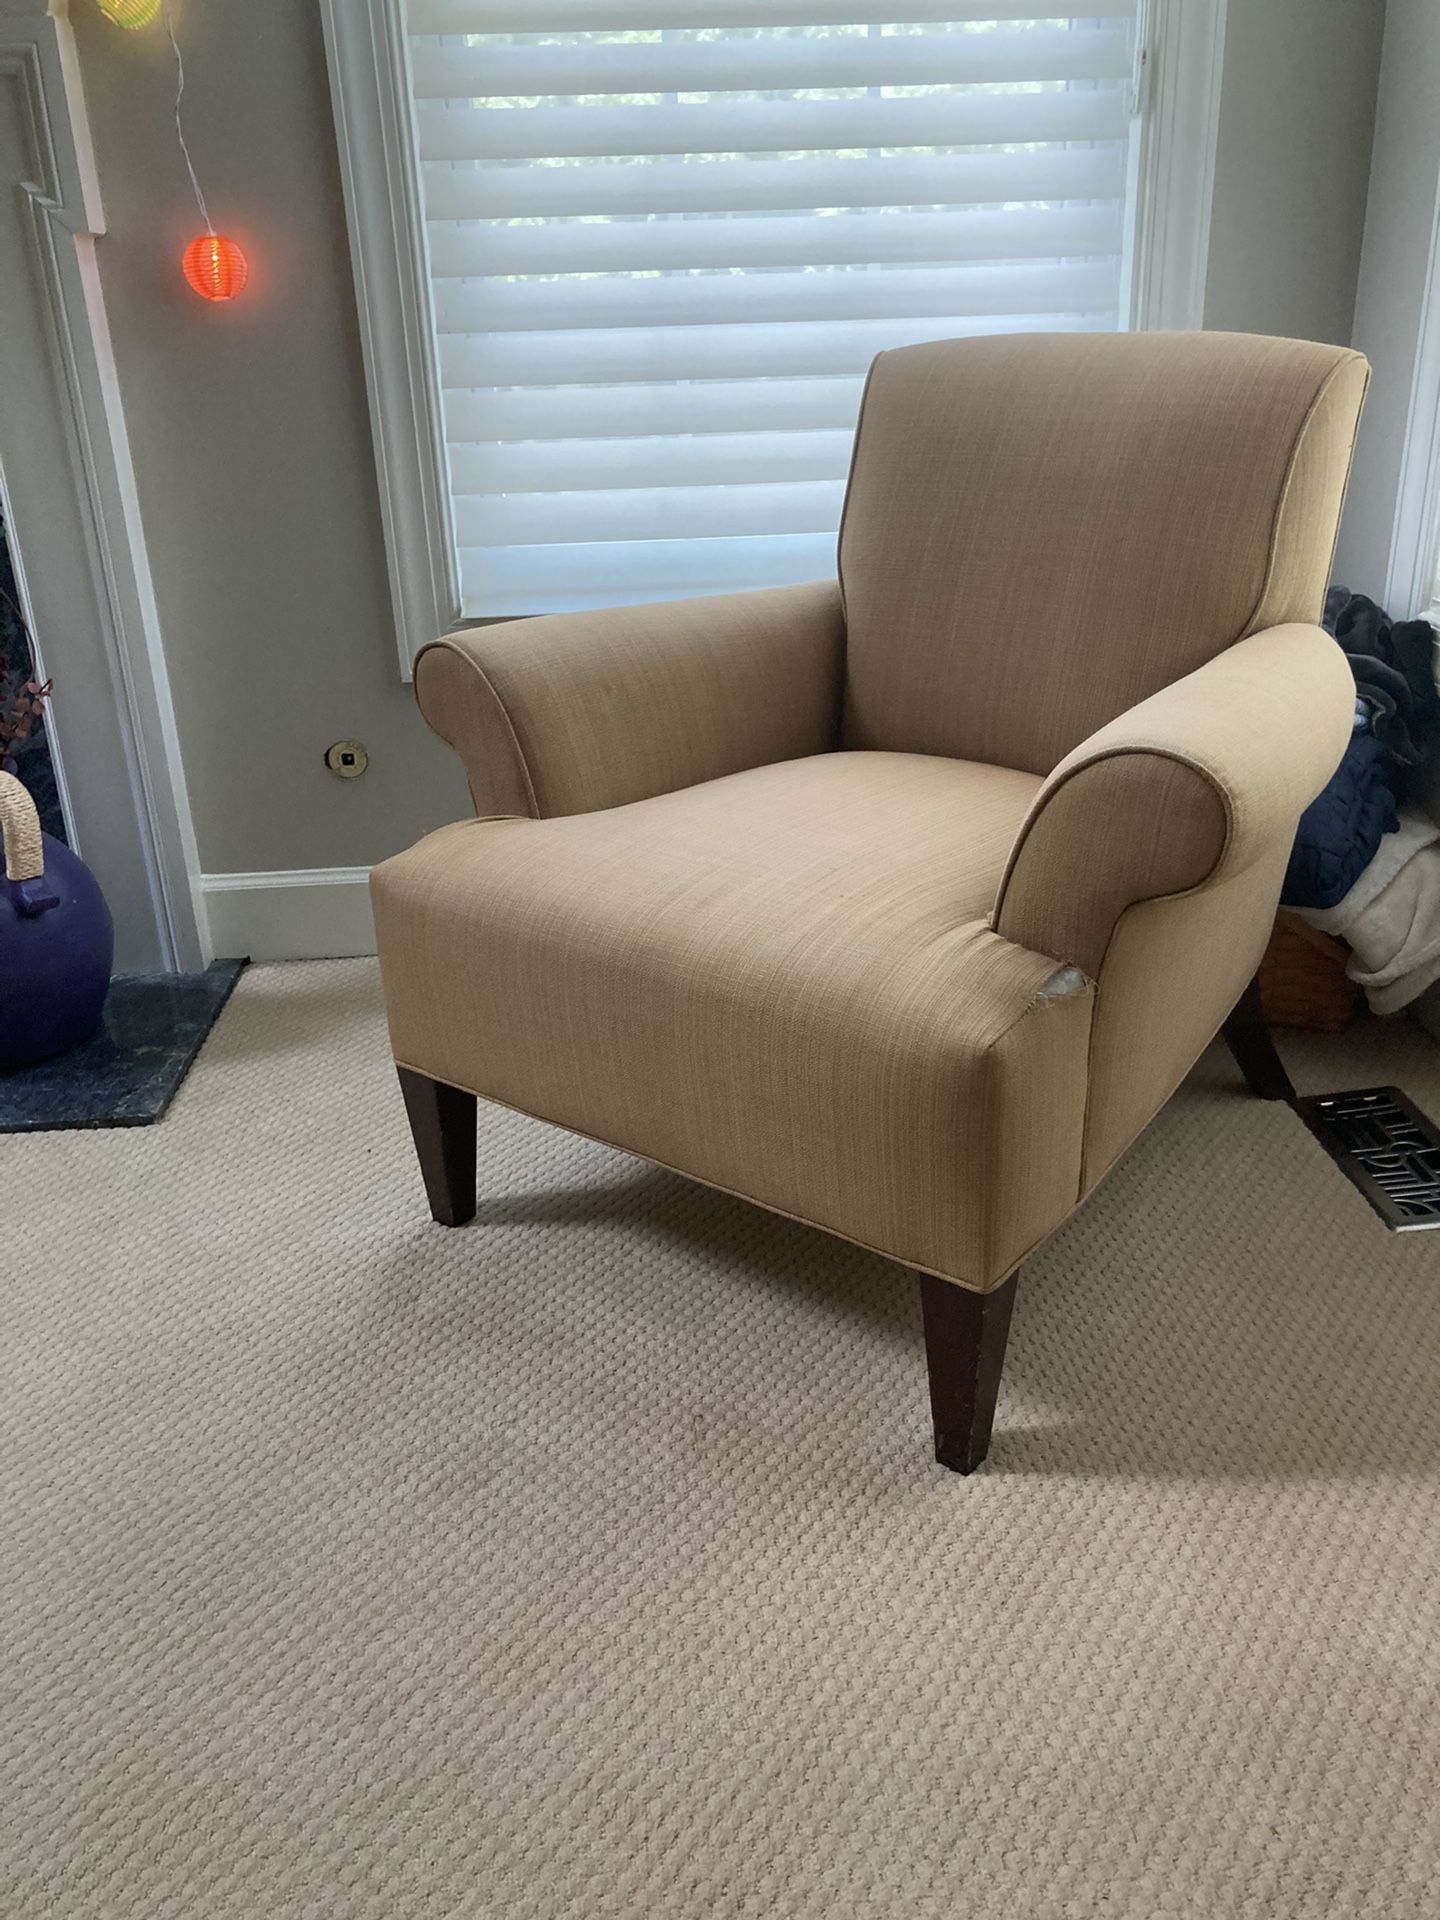 God/Tan Arm Chair With Wooden Legs